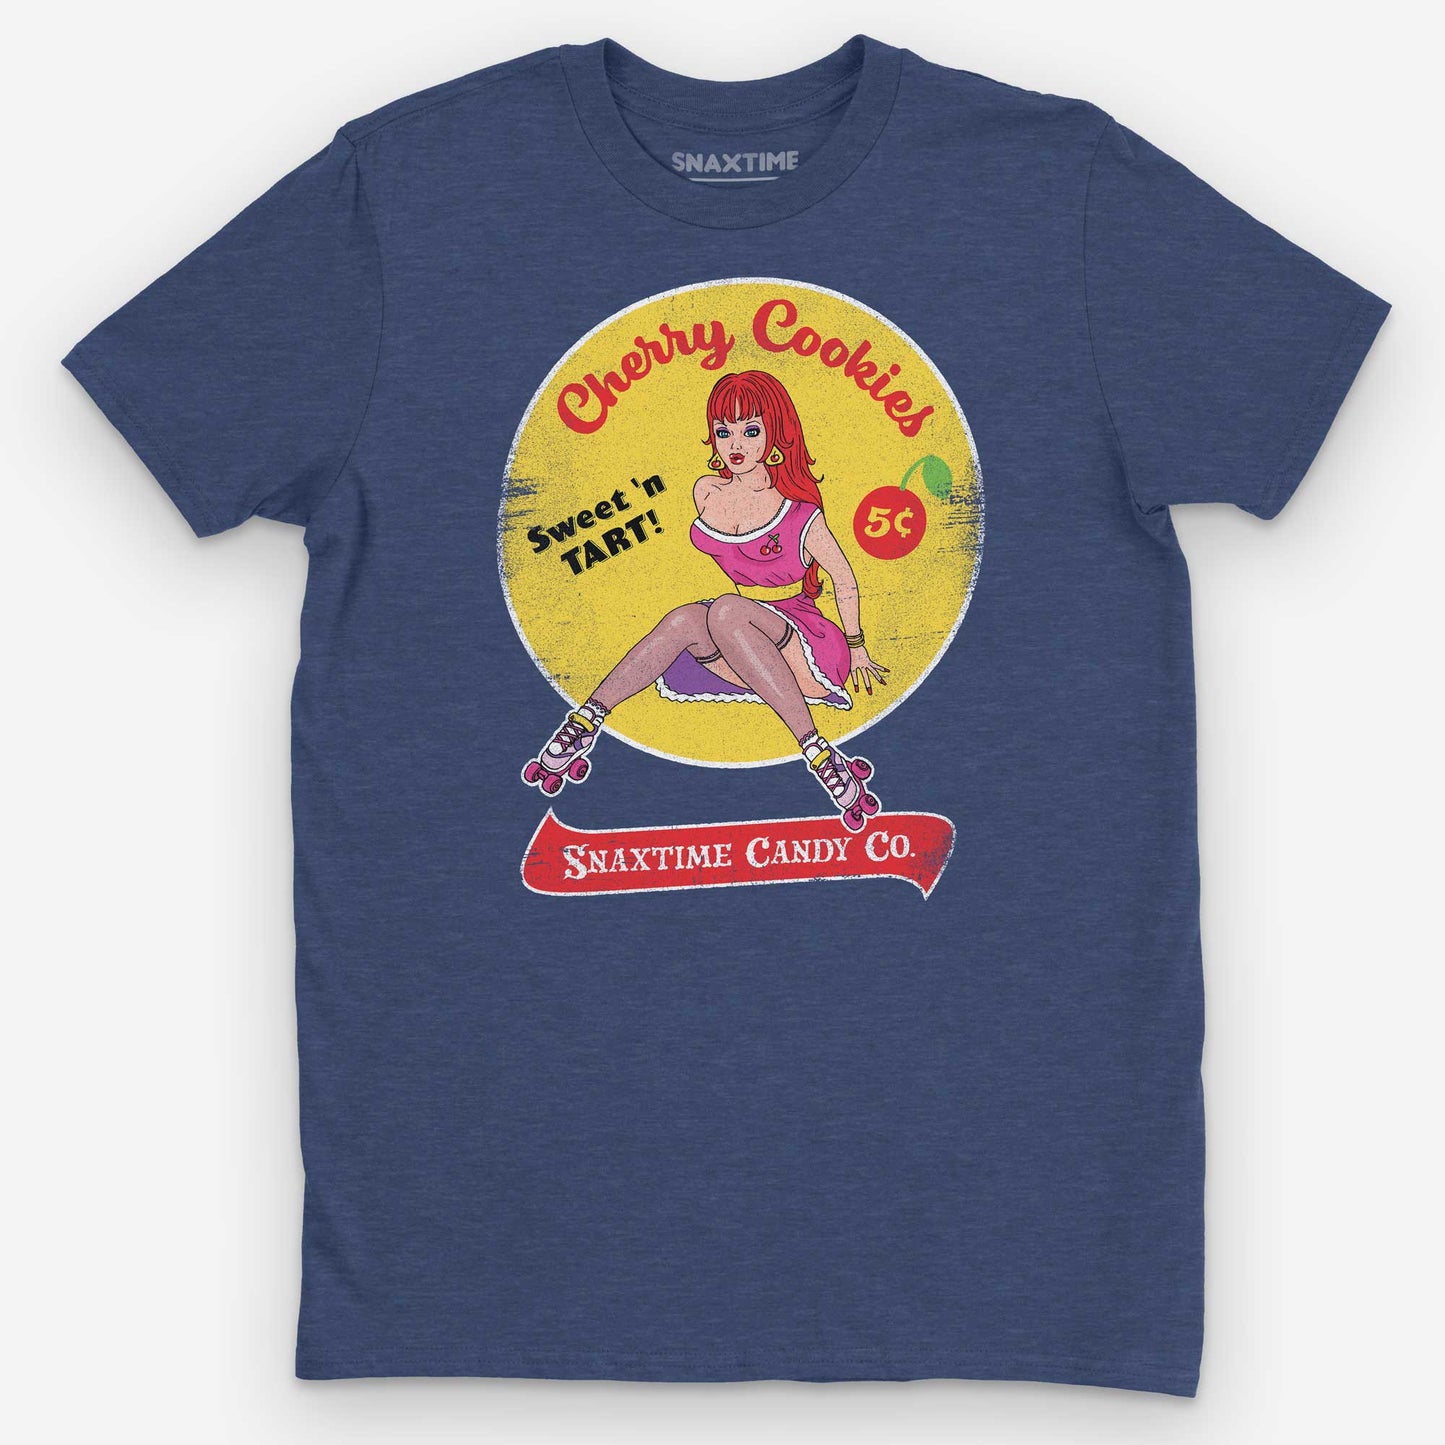 Heather Blue Cherry Cookies Retro Comic Pinup Graphic T-Shirt by Snaxtime